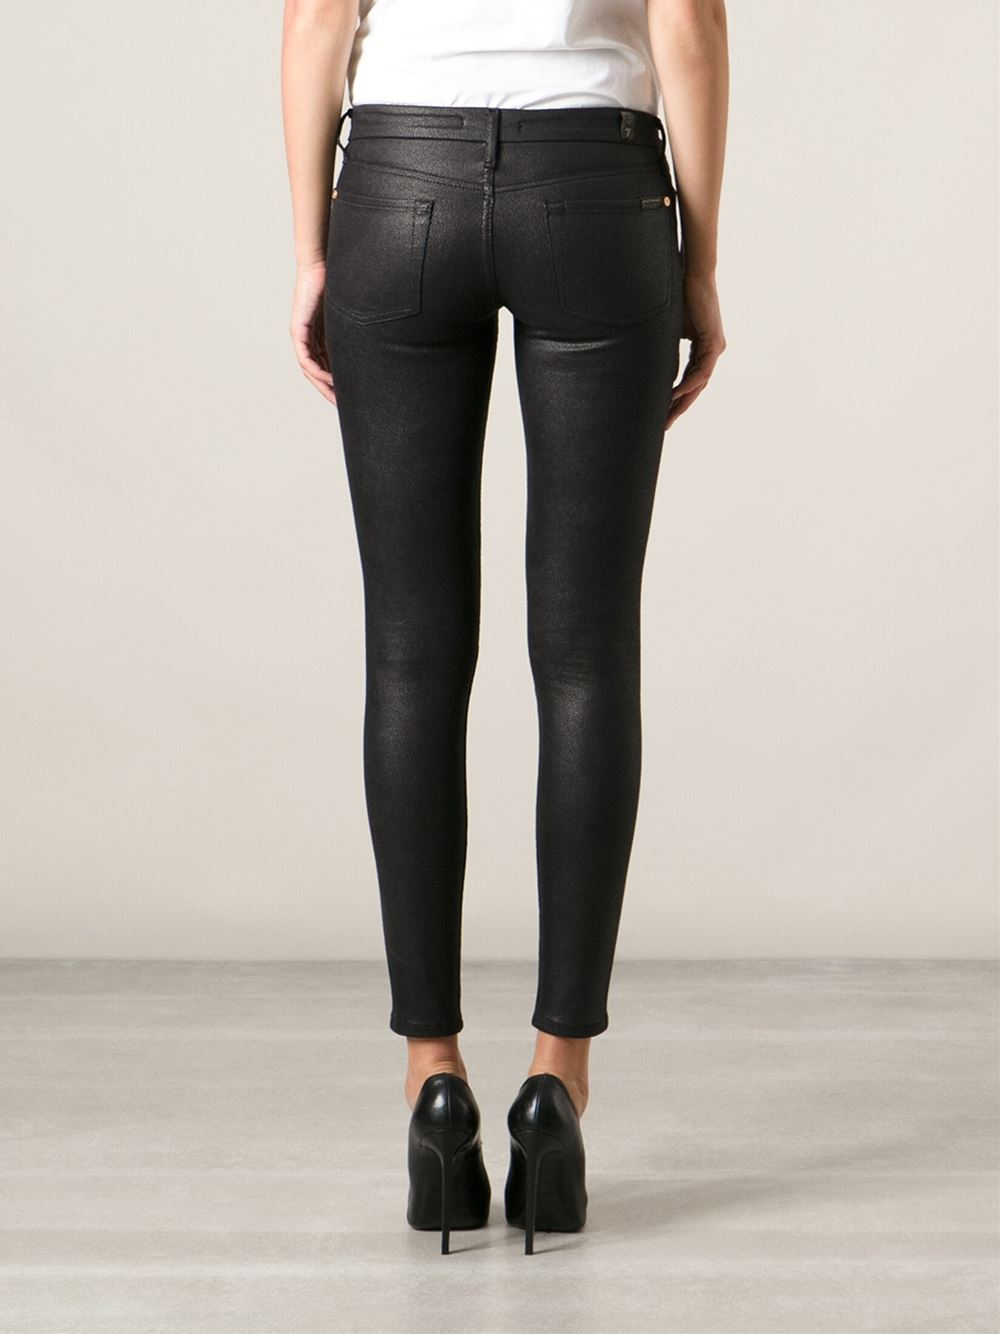 7 For All Mankind Coated Skinny Jeans in Black - Lyst